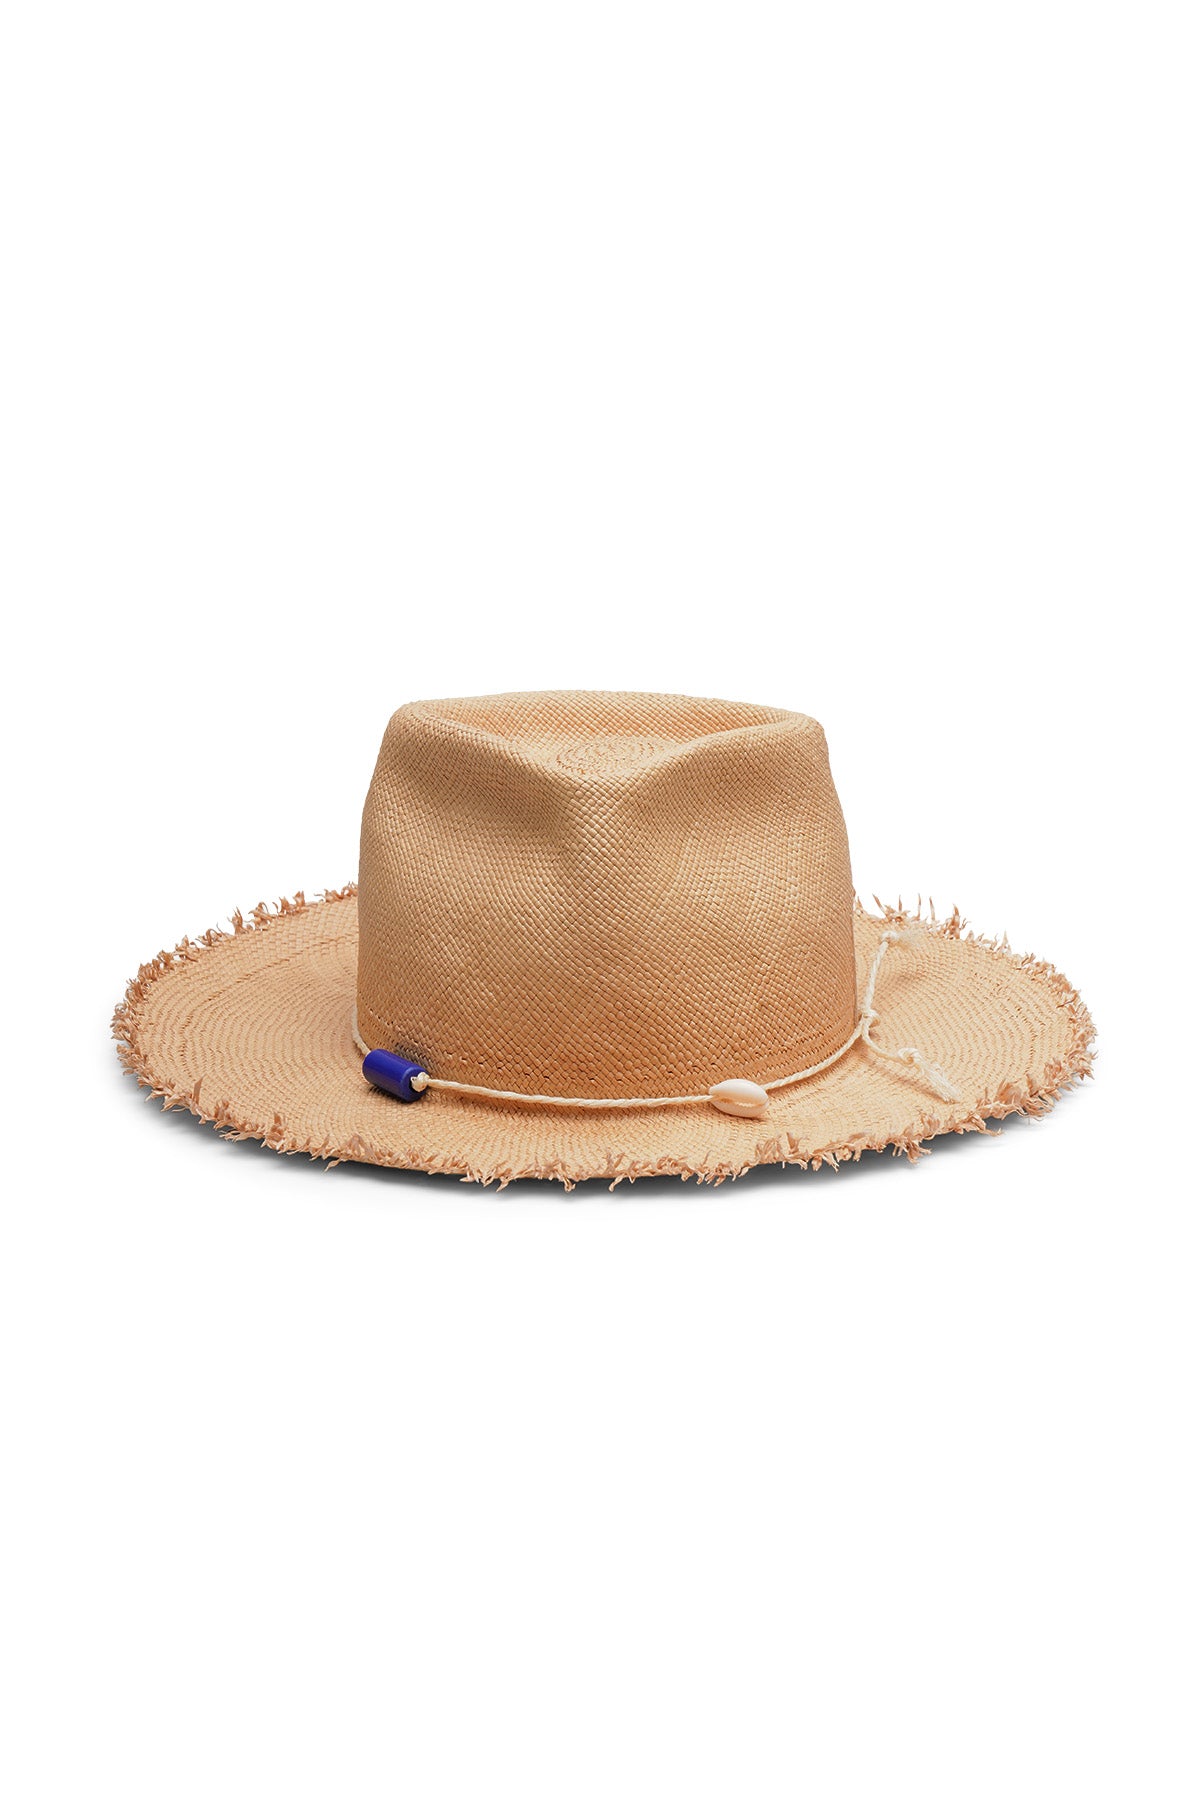 Beige straw fedora style hat with a wide brim, frayed edges and teardrop crease. Tied rope with beads and seashell detail. Unisex hat style in various sizes and colors. We ship worldwide. Shop now. Each SoonNoon hat is handmade with unique character in Stockholm, Sweden. 